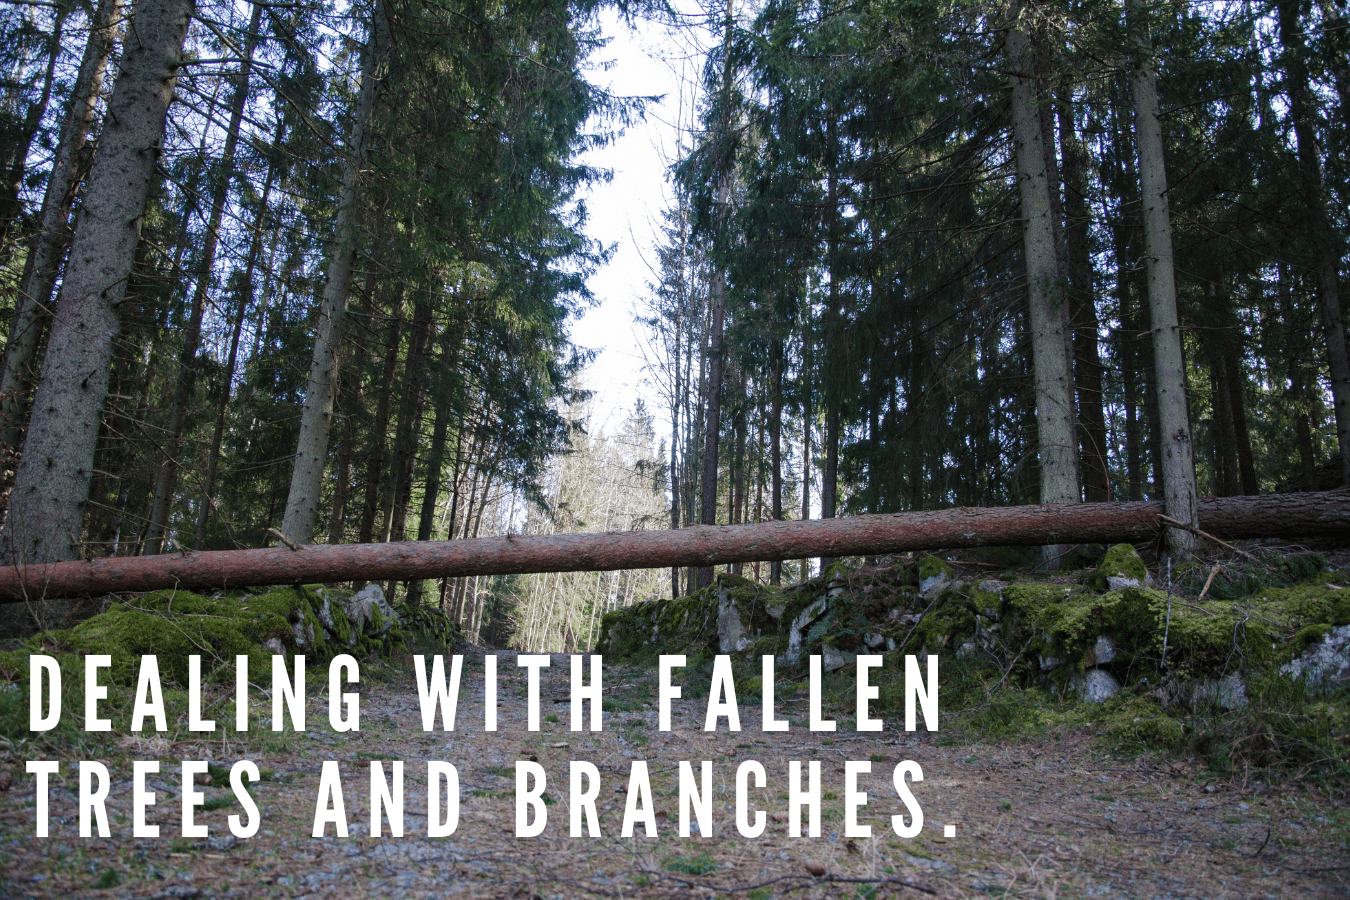 Dealing with fallen trees and branches.